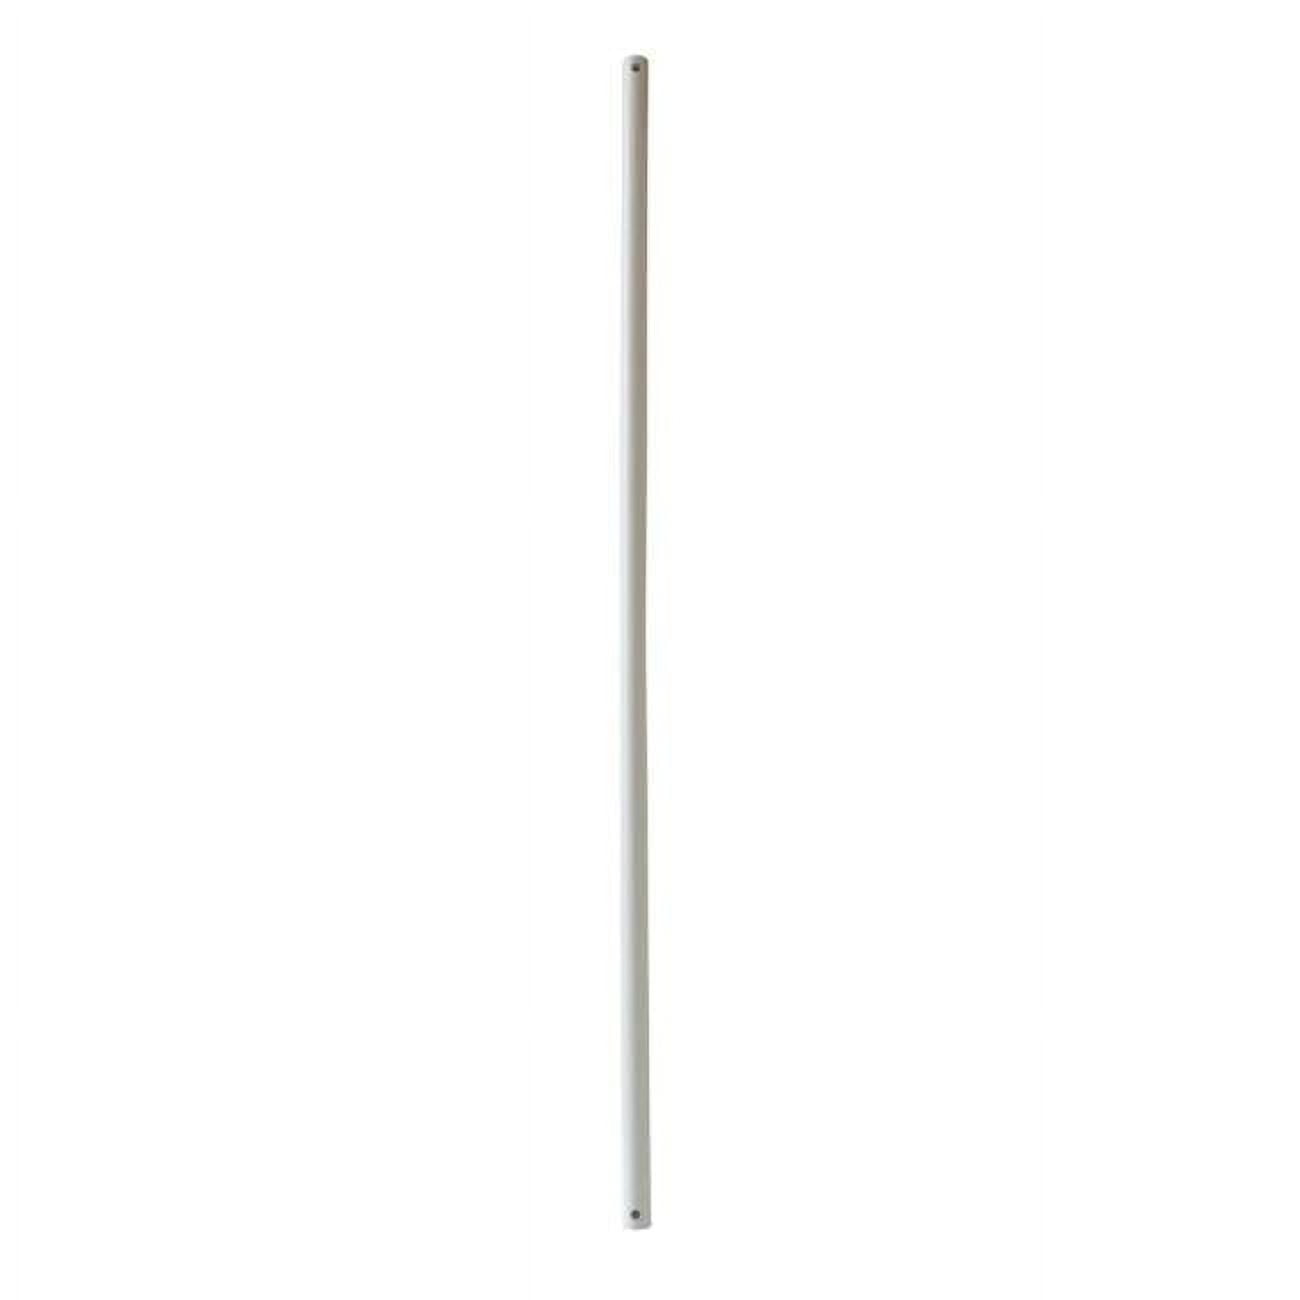 Picture of Lucci Air 21058436 Lucci Air Antique White 36in. Downrod